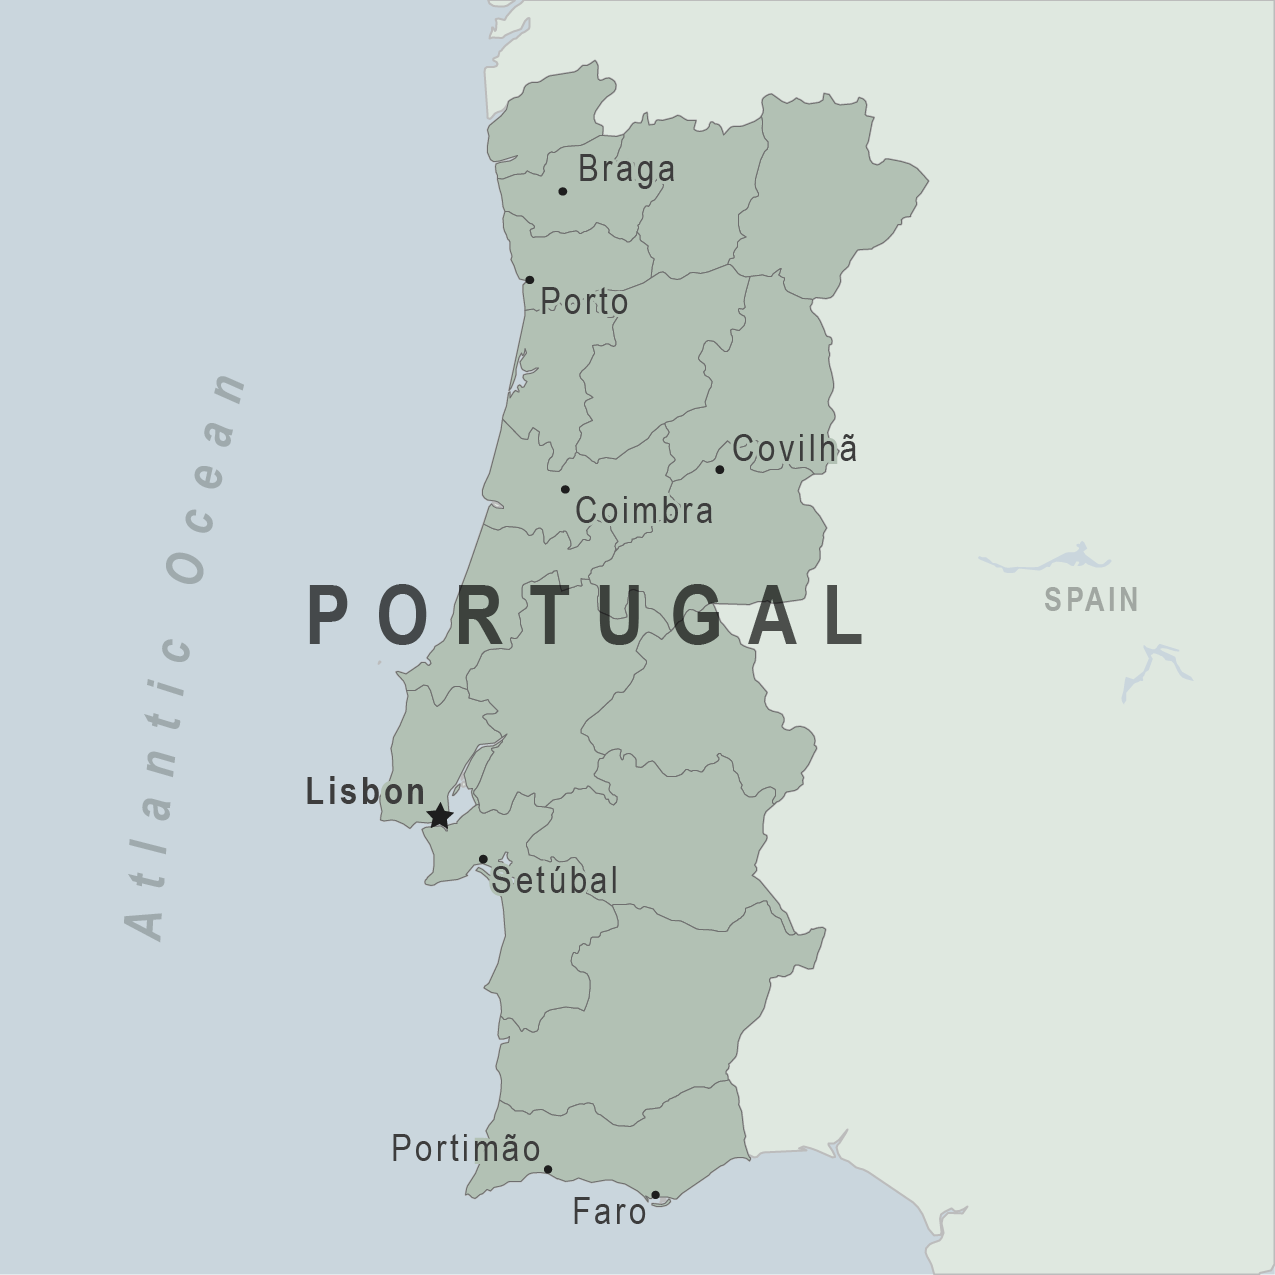 Portugal - Traveler view | Travelers' Health | CDC